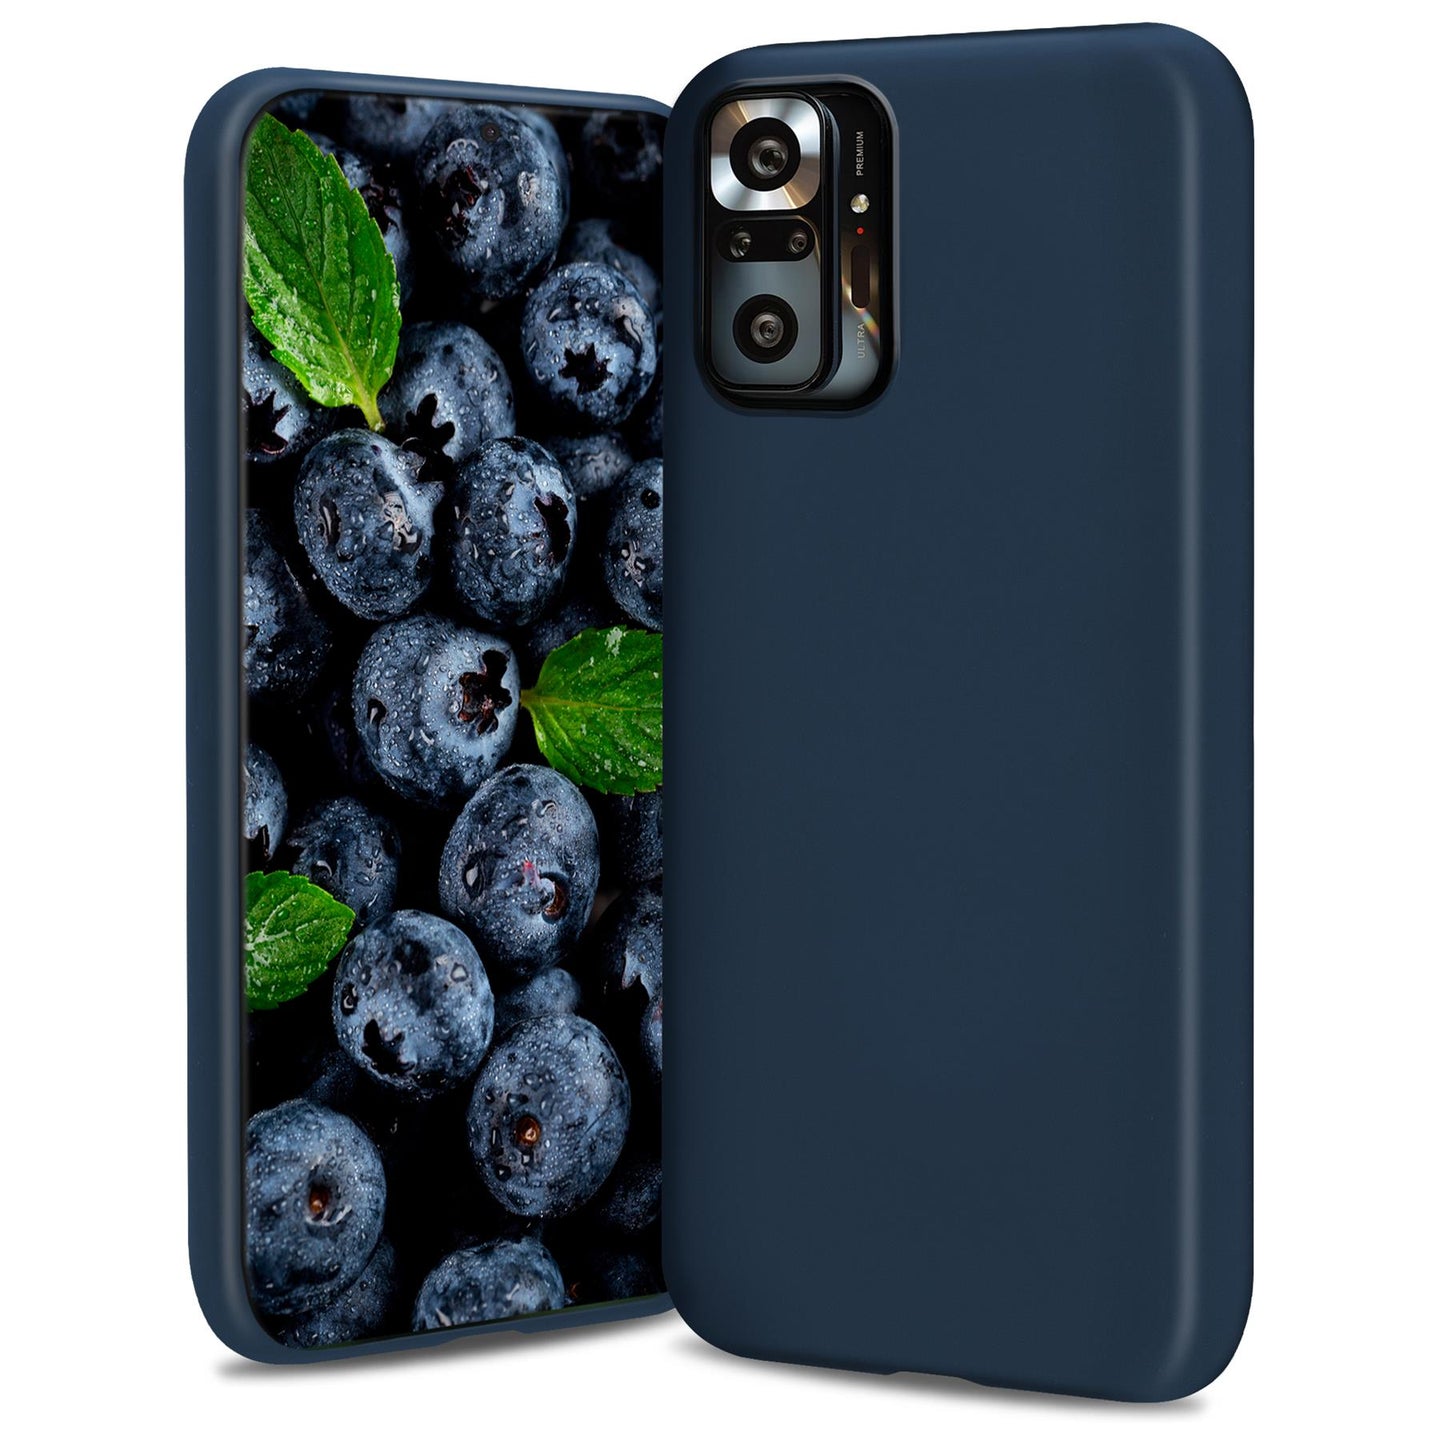 Moozy Lifestyle. Silicone Case for Xiaomi Redmi Note 10 Pro, Note 10 Pro Max, Midnight Blue - Liquid Silicone Lightweight Cover with Matte Finish